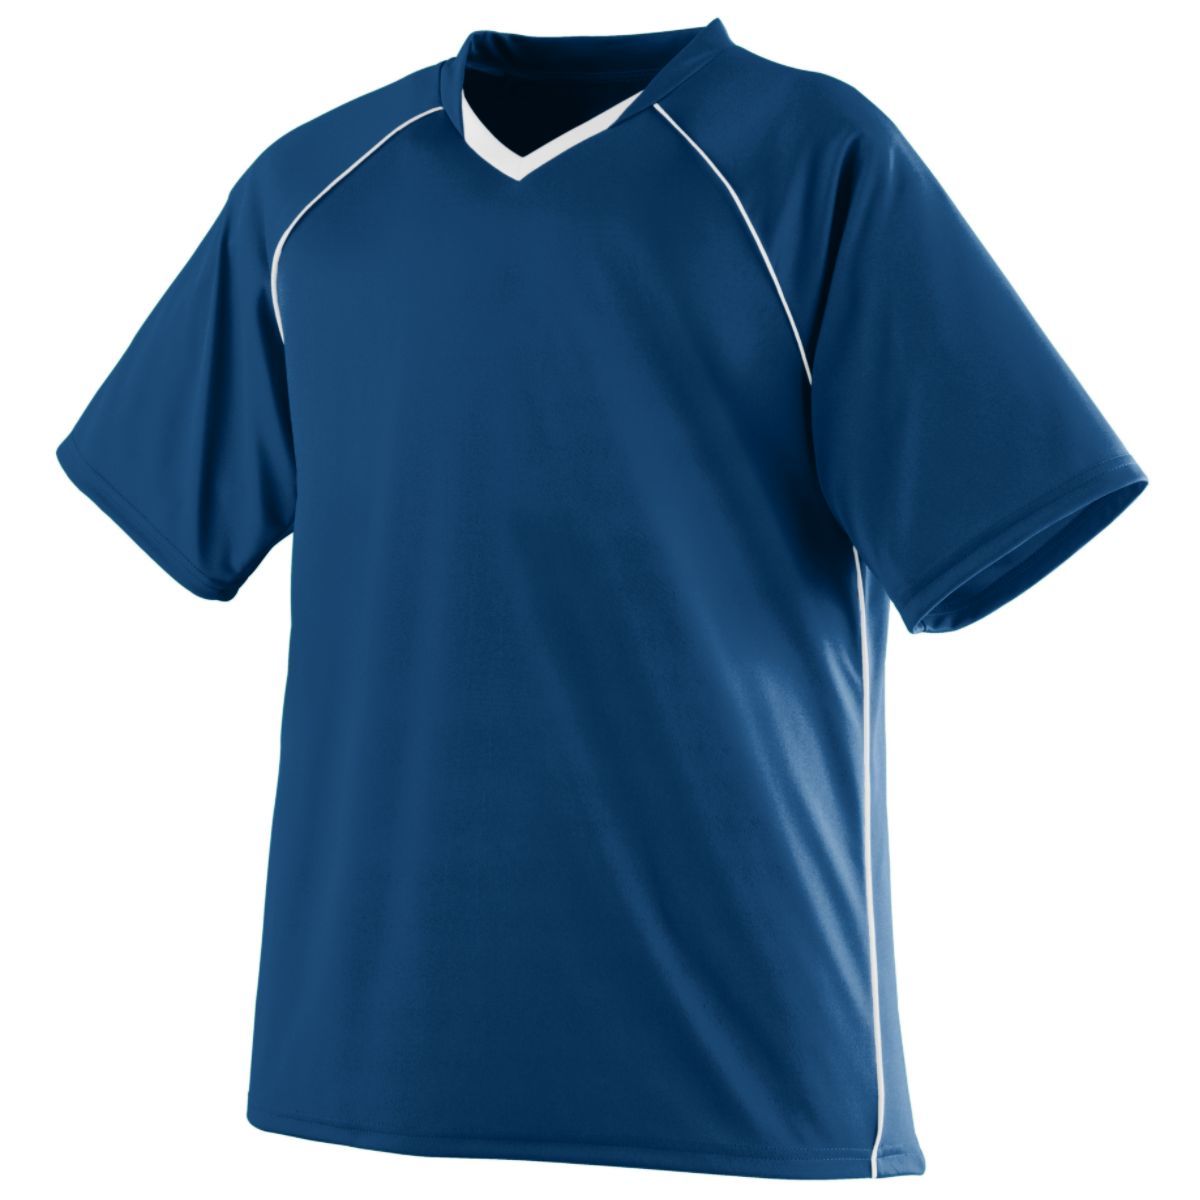 Augusta Sportswear Youth Striker Jersey in Navy/White  -Part of the Youth, Youth-Jersey, Augusta-Products, Soccer, Shirts, All-Sports-1 product lines at KanaleyCreations.com